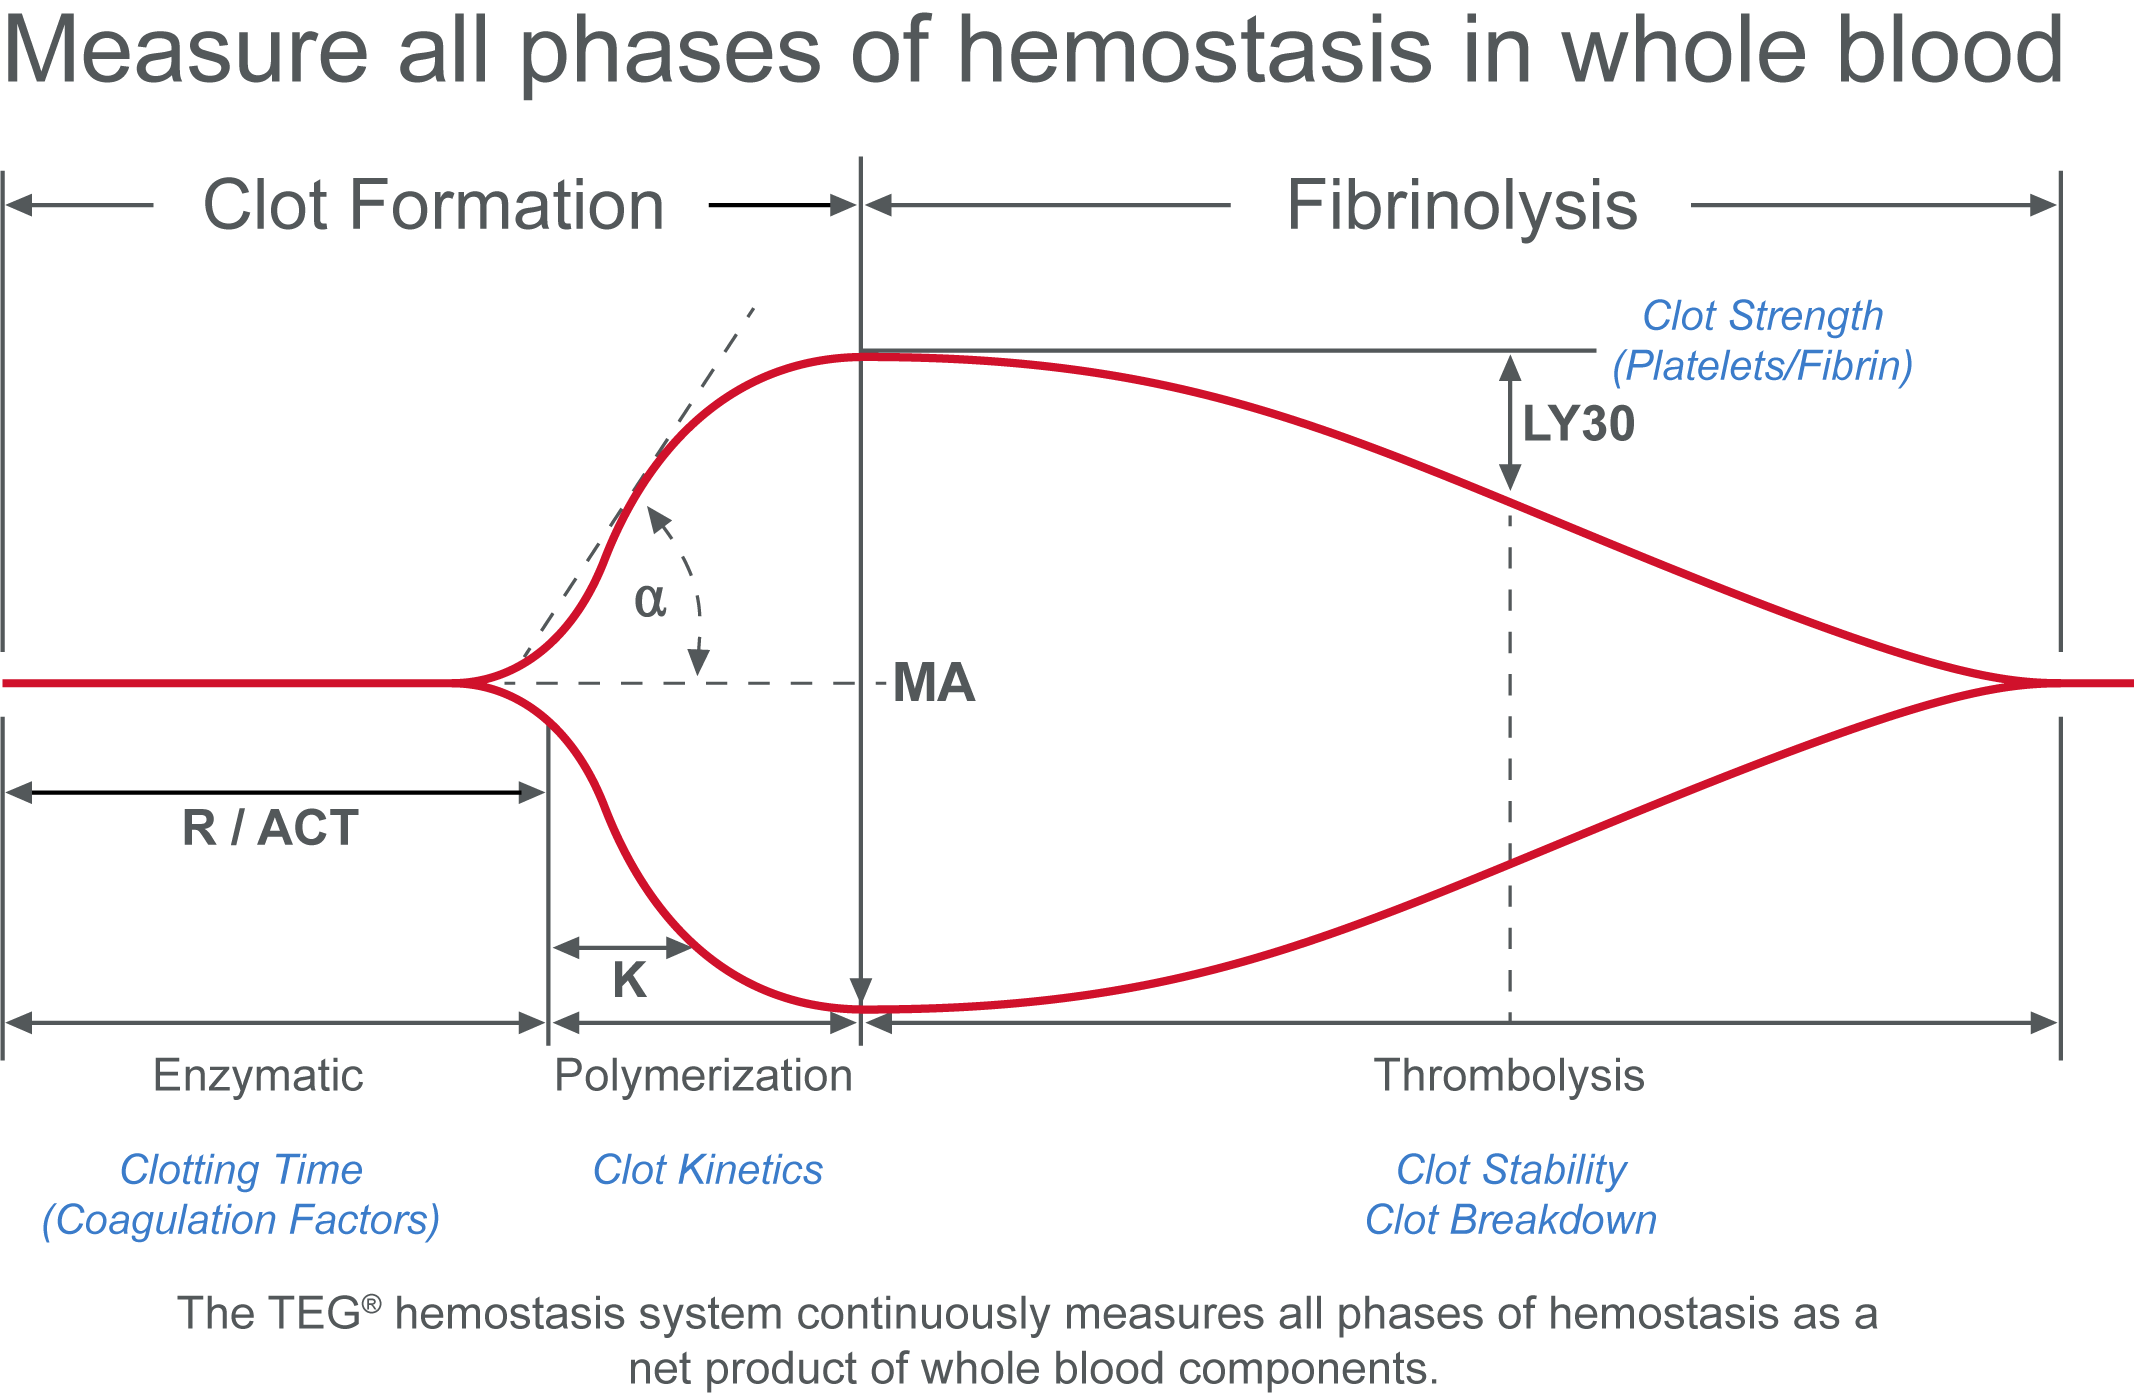 Measure all phases of hemostasis in whole blood